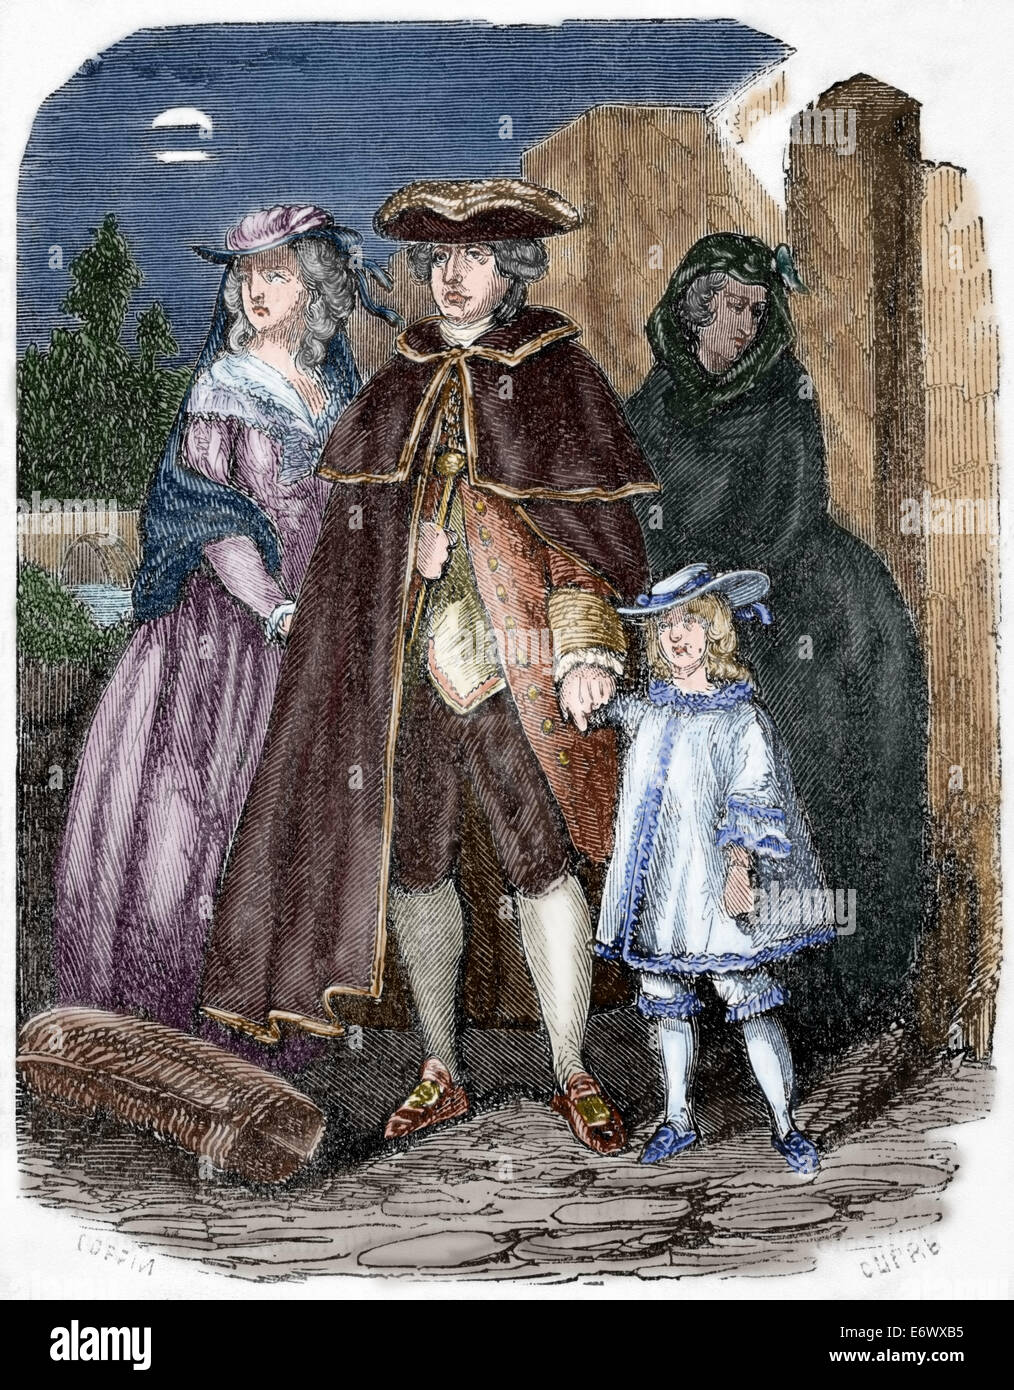 French Revolution (1789-1799). Escape of Louis XVI (1754-1793) and his family, 1791. Engraving by Dupre. Colored. Stock Photo